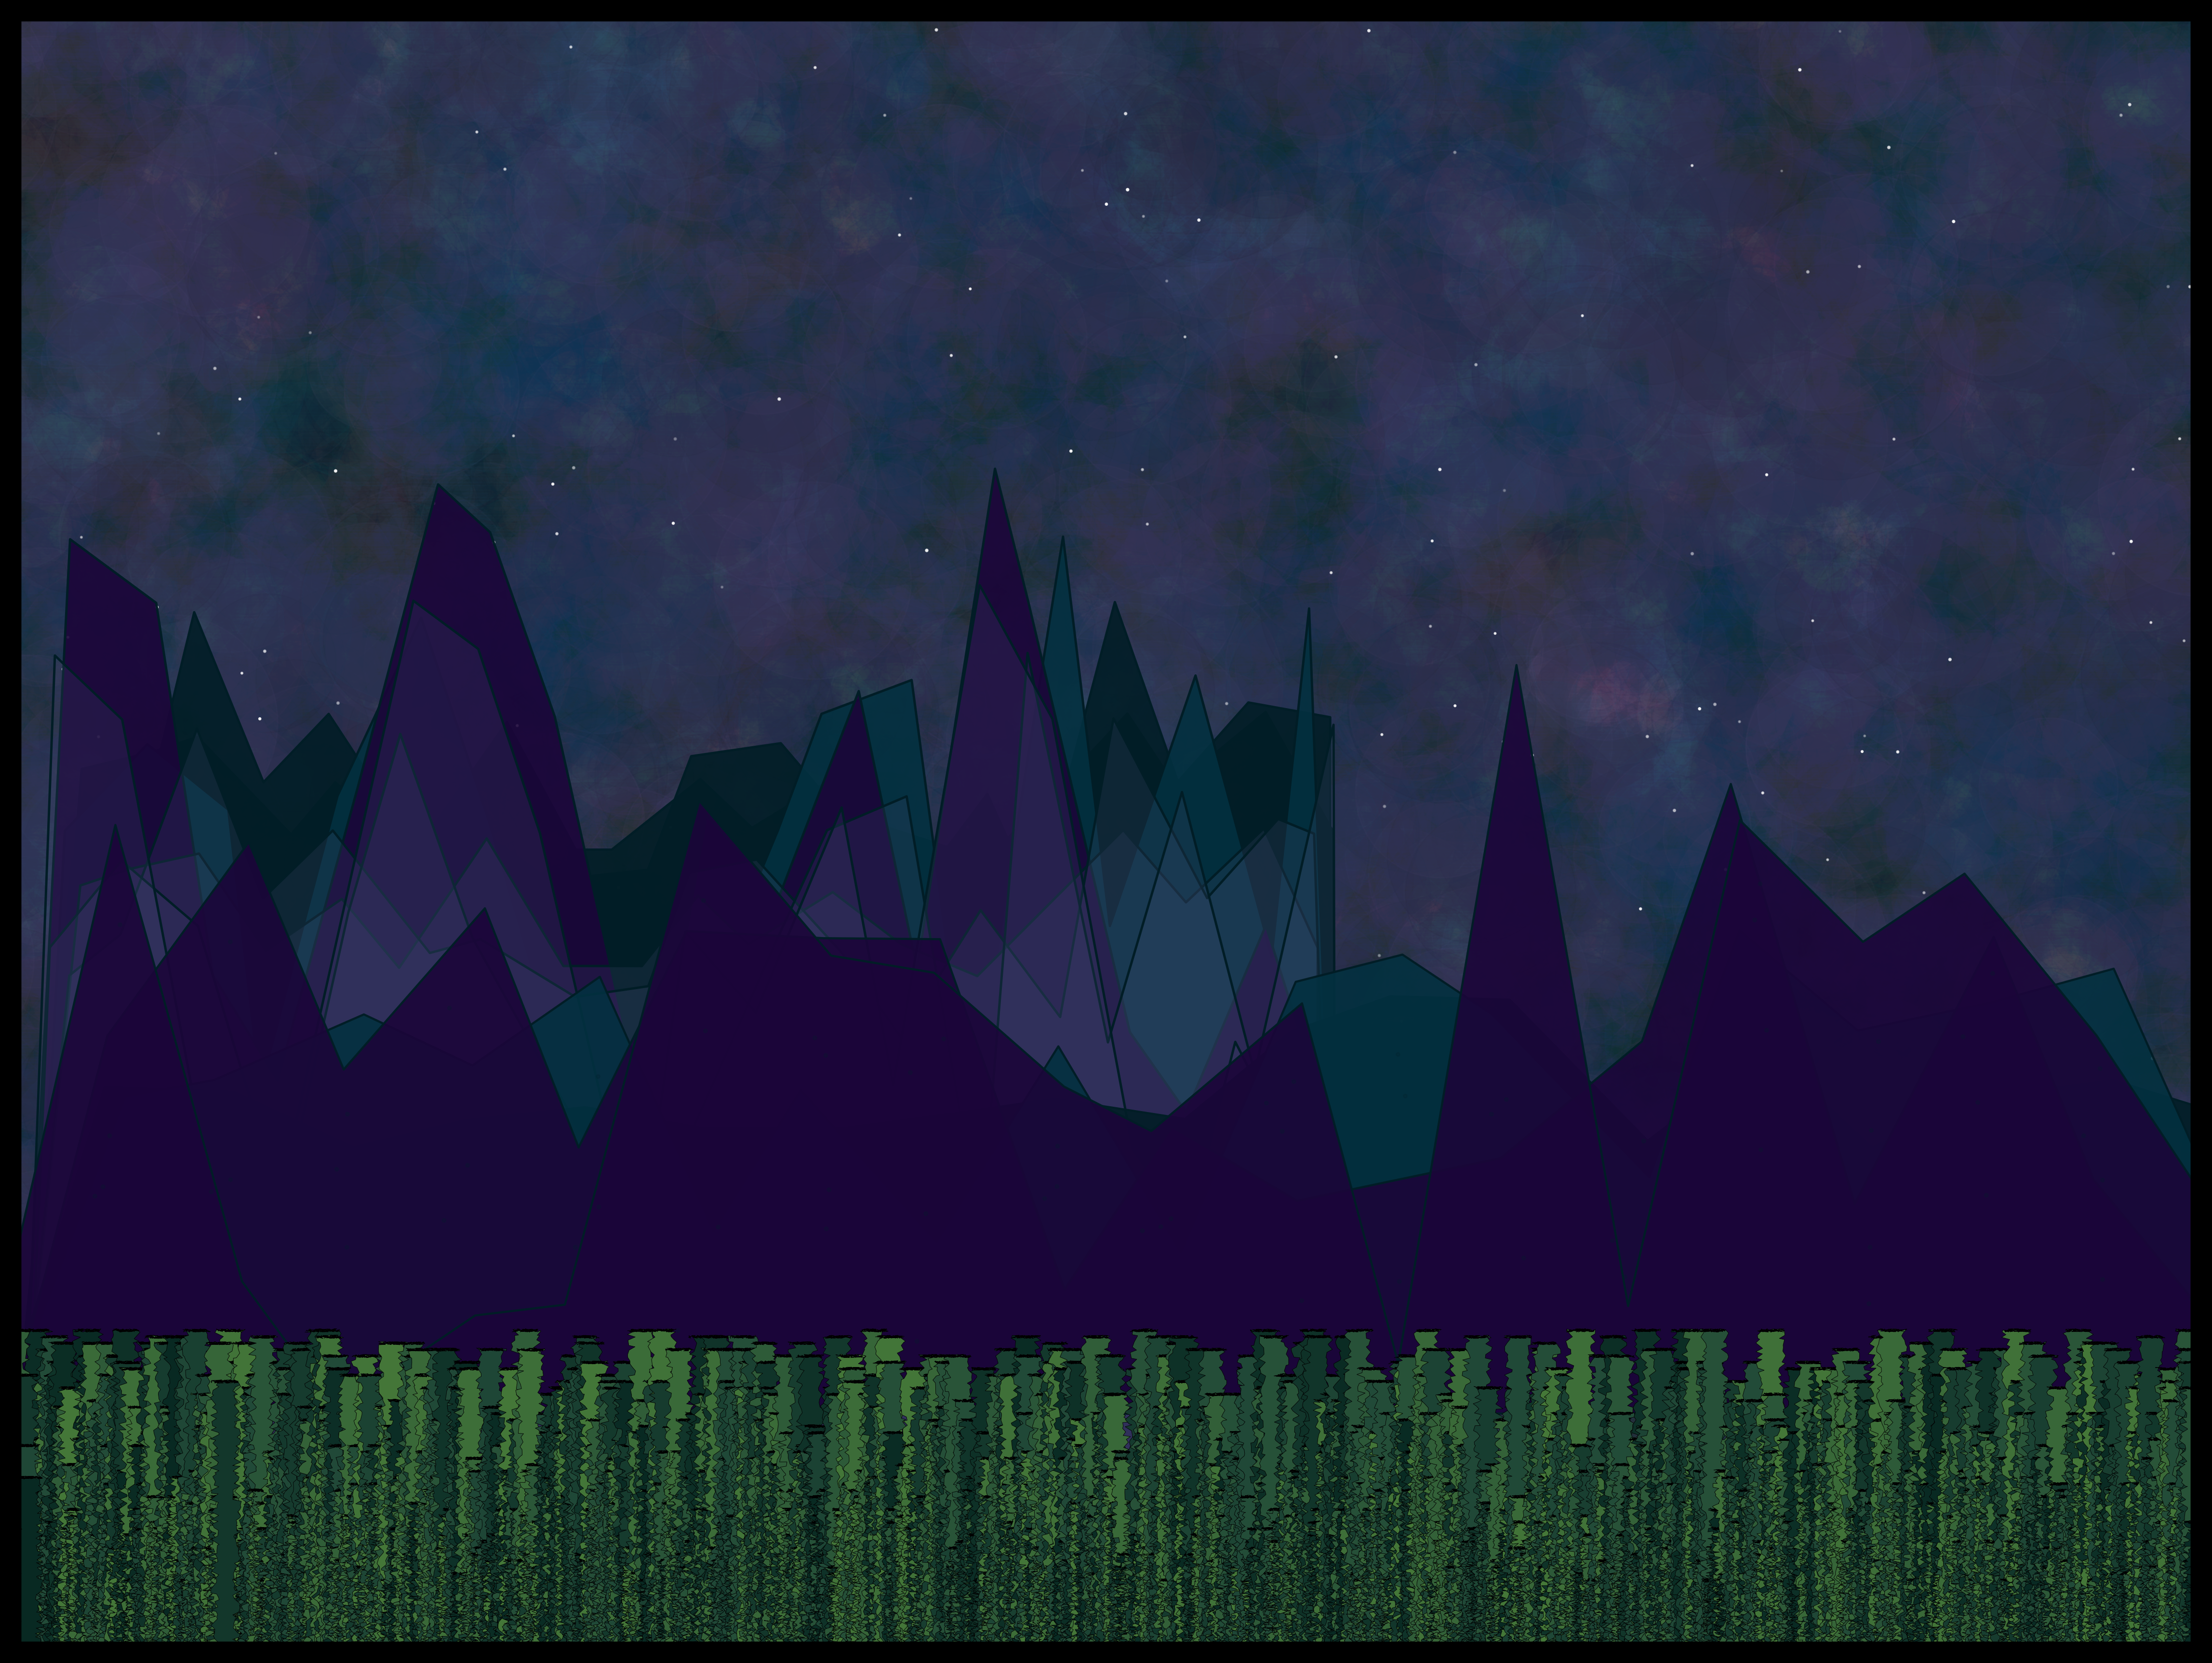 An updated image of an old piece by Meghan Harris called mountains. A landscape of a textured night sky with stars in the background, multiple polygon-shaped mountain ranges, and detailed trees in varying shades of green in the foreground